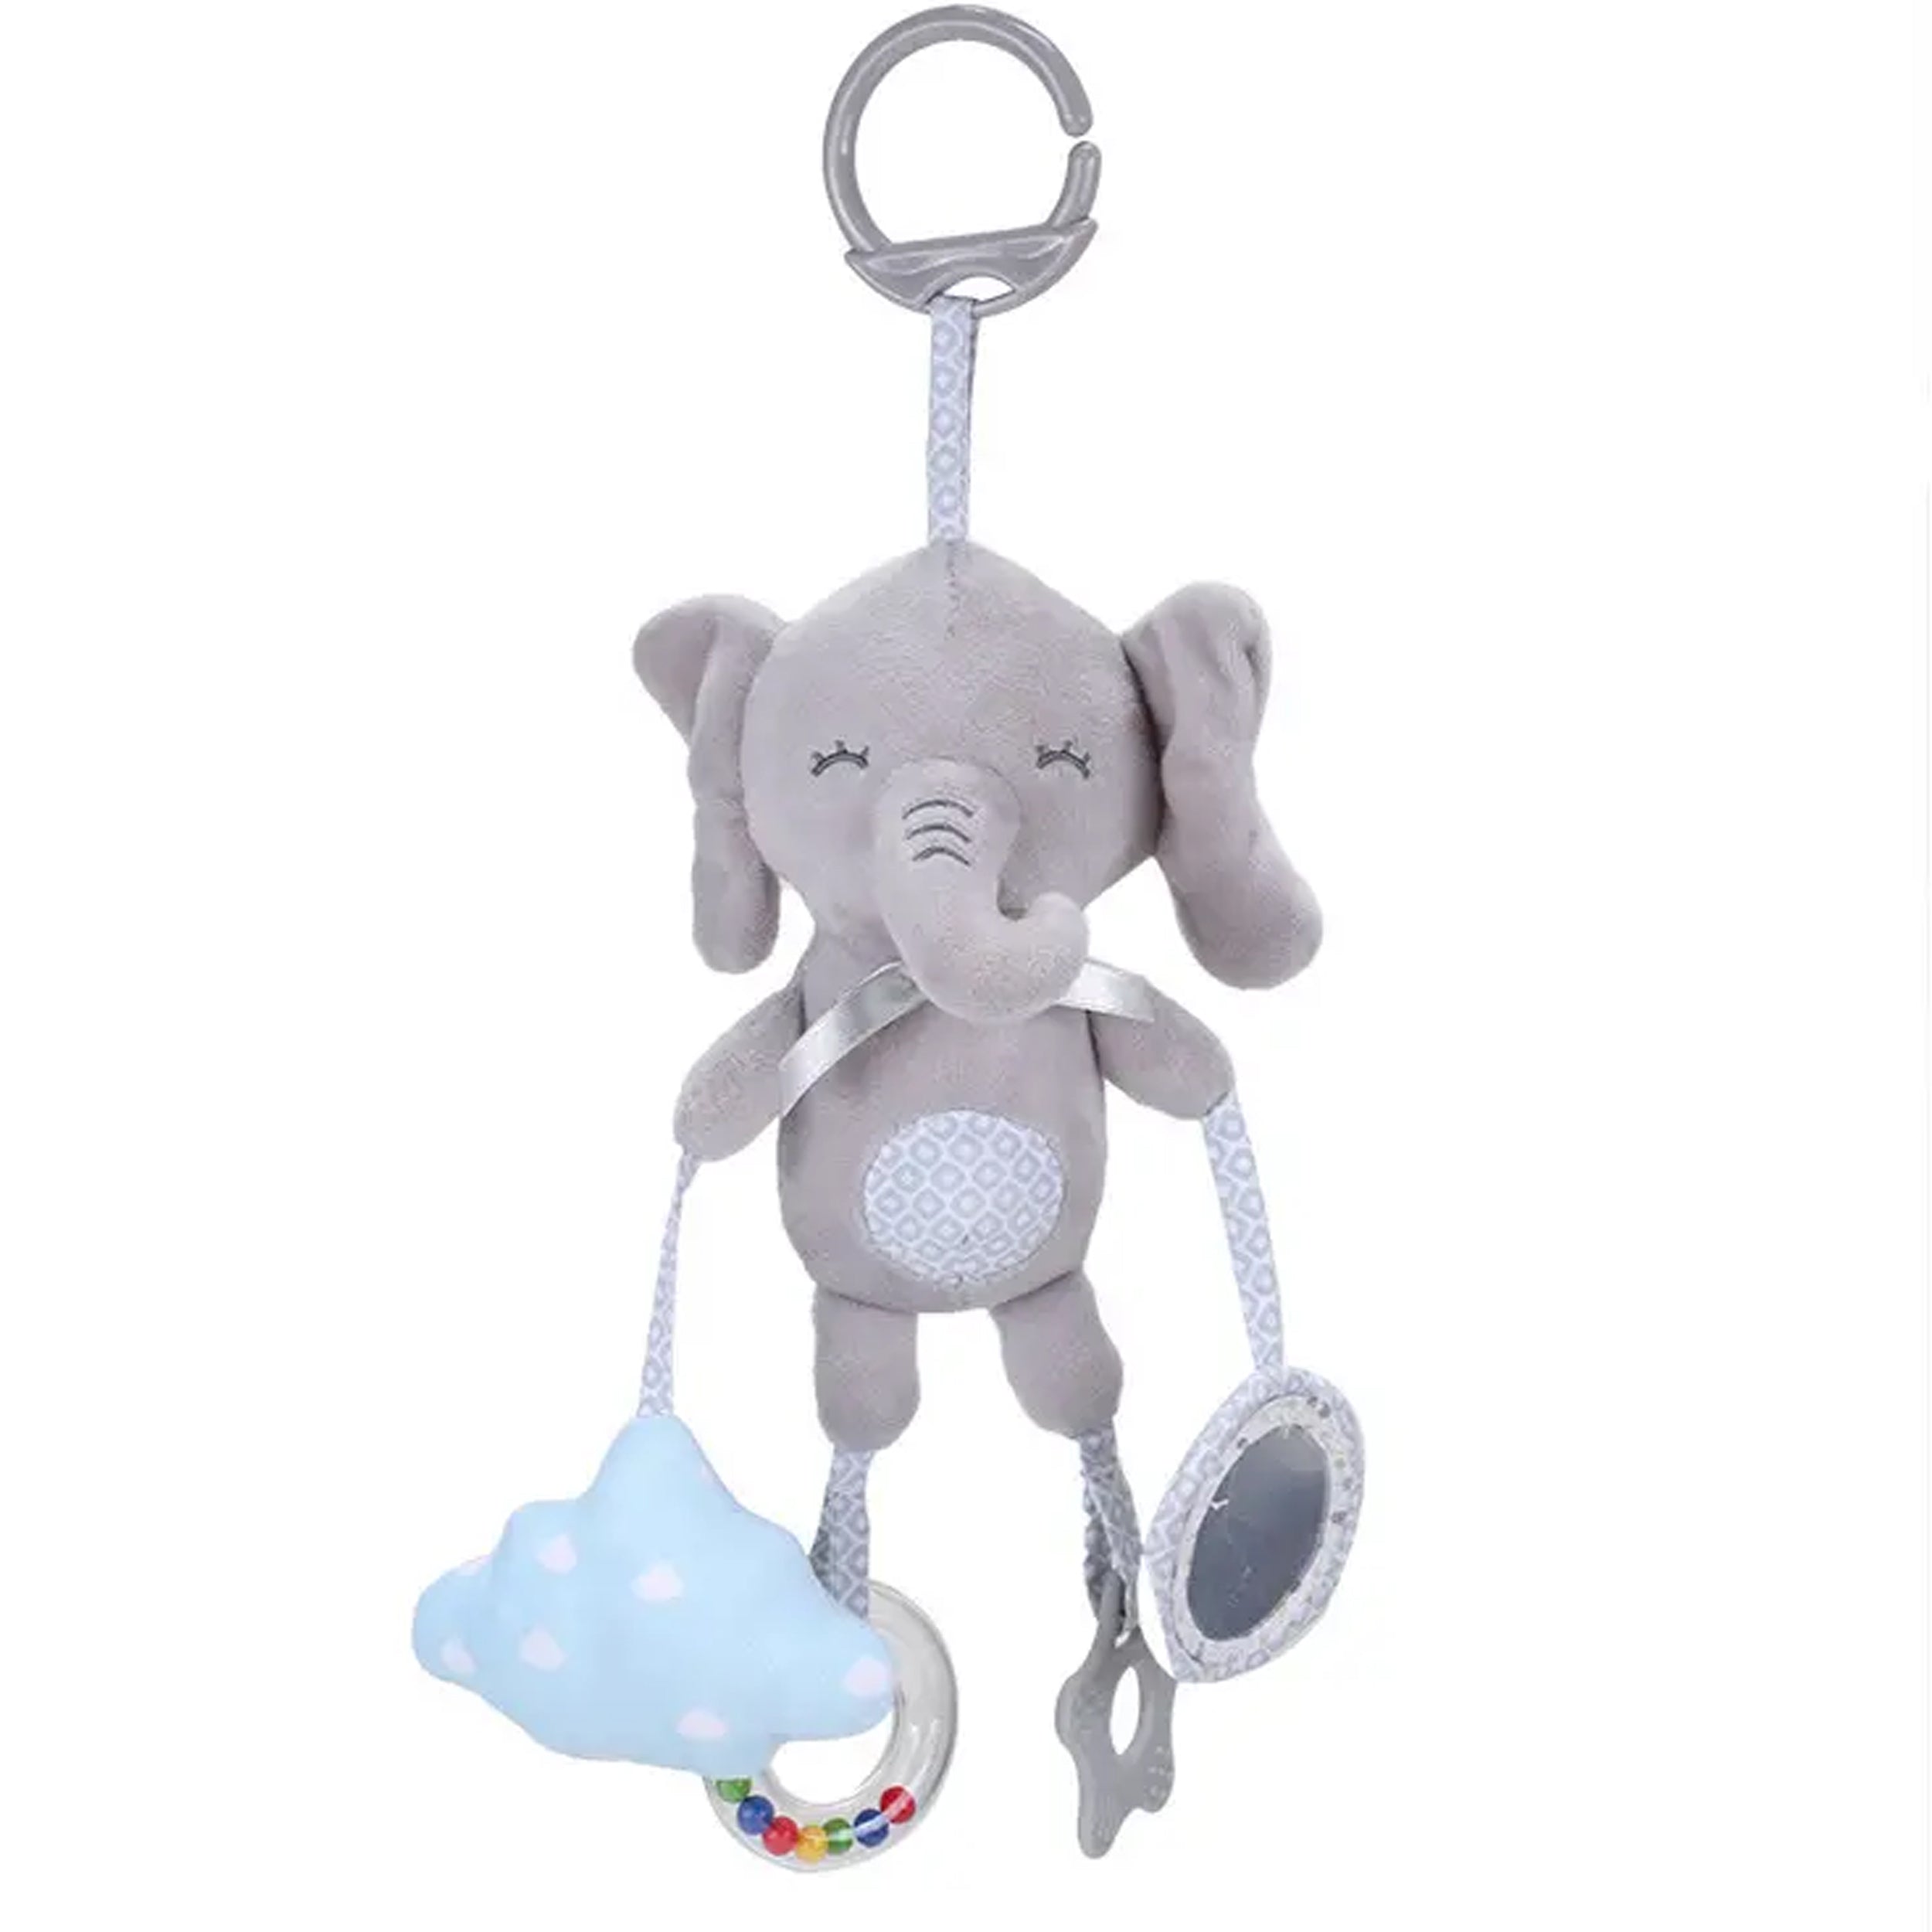 Animal Mix Plush Kids Teether and Bell Toy